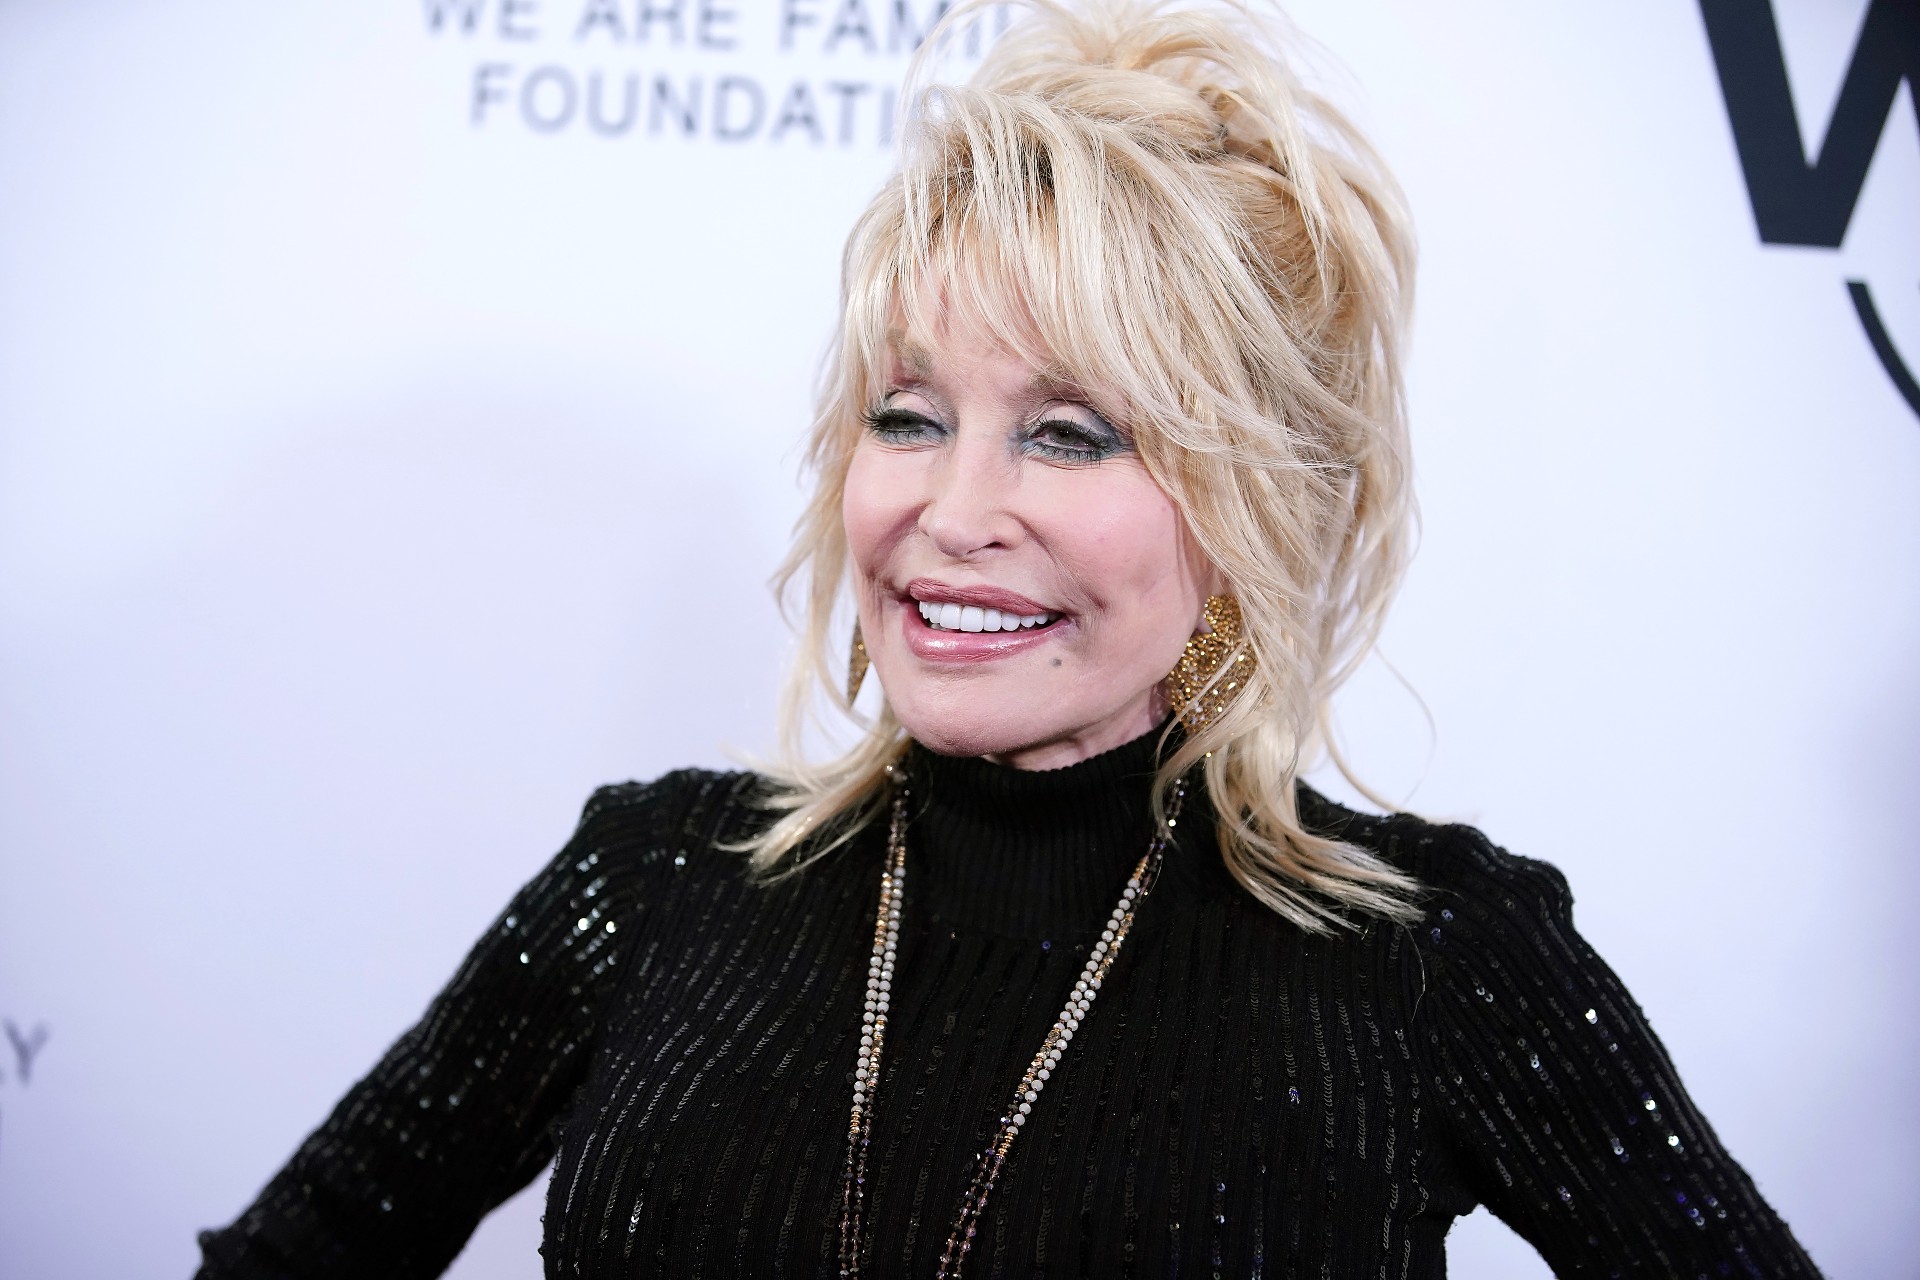 Dolly Parton wears a black outfit during a red carpet event.